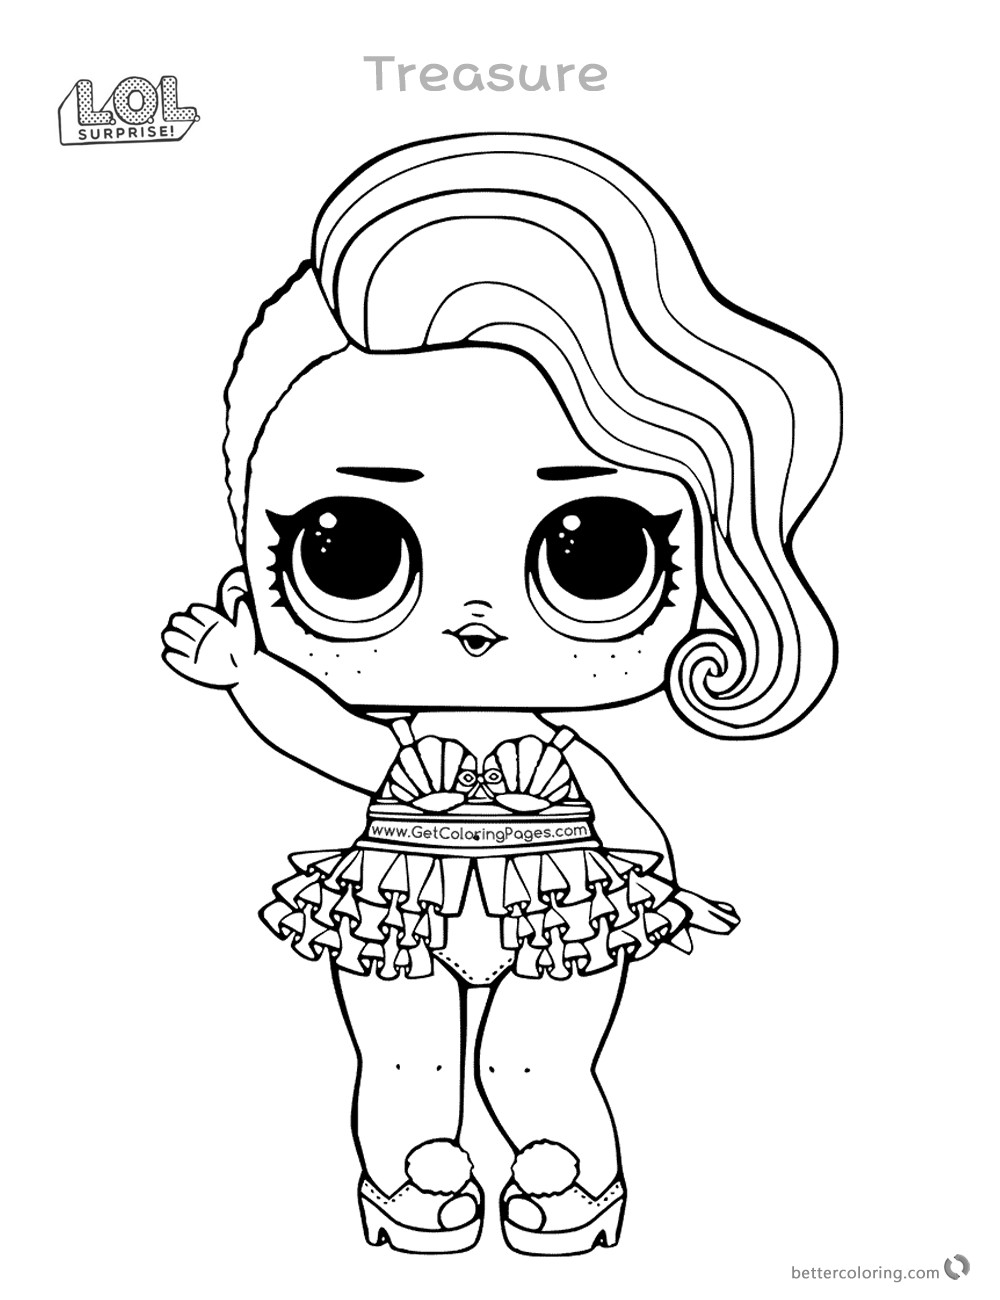 Ausmalbilder Lol Surprise
 Treasure From Lol Surprise Doll Coloring Pages Printable